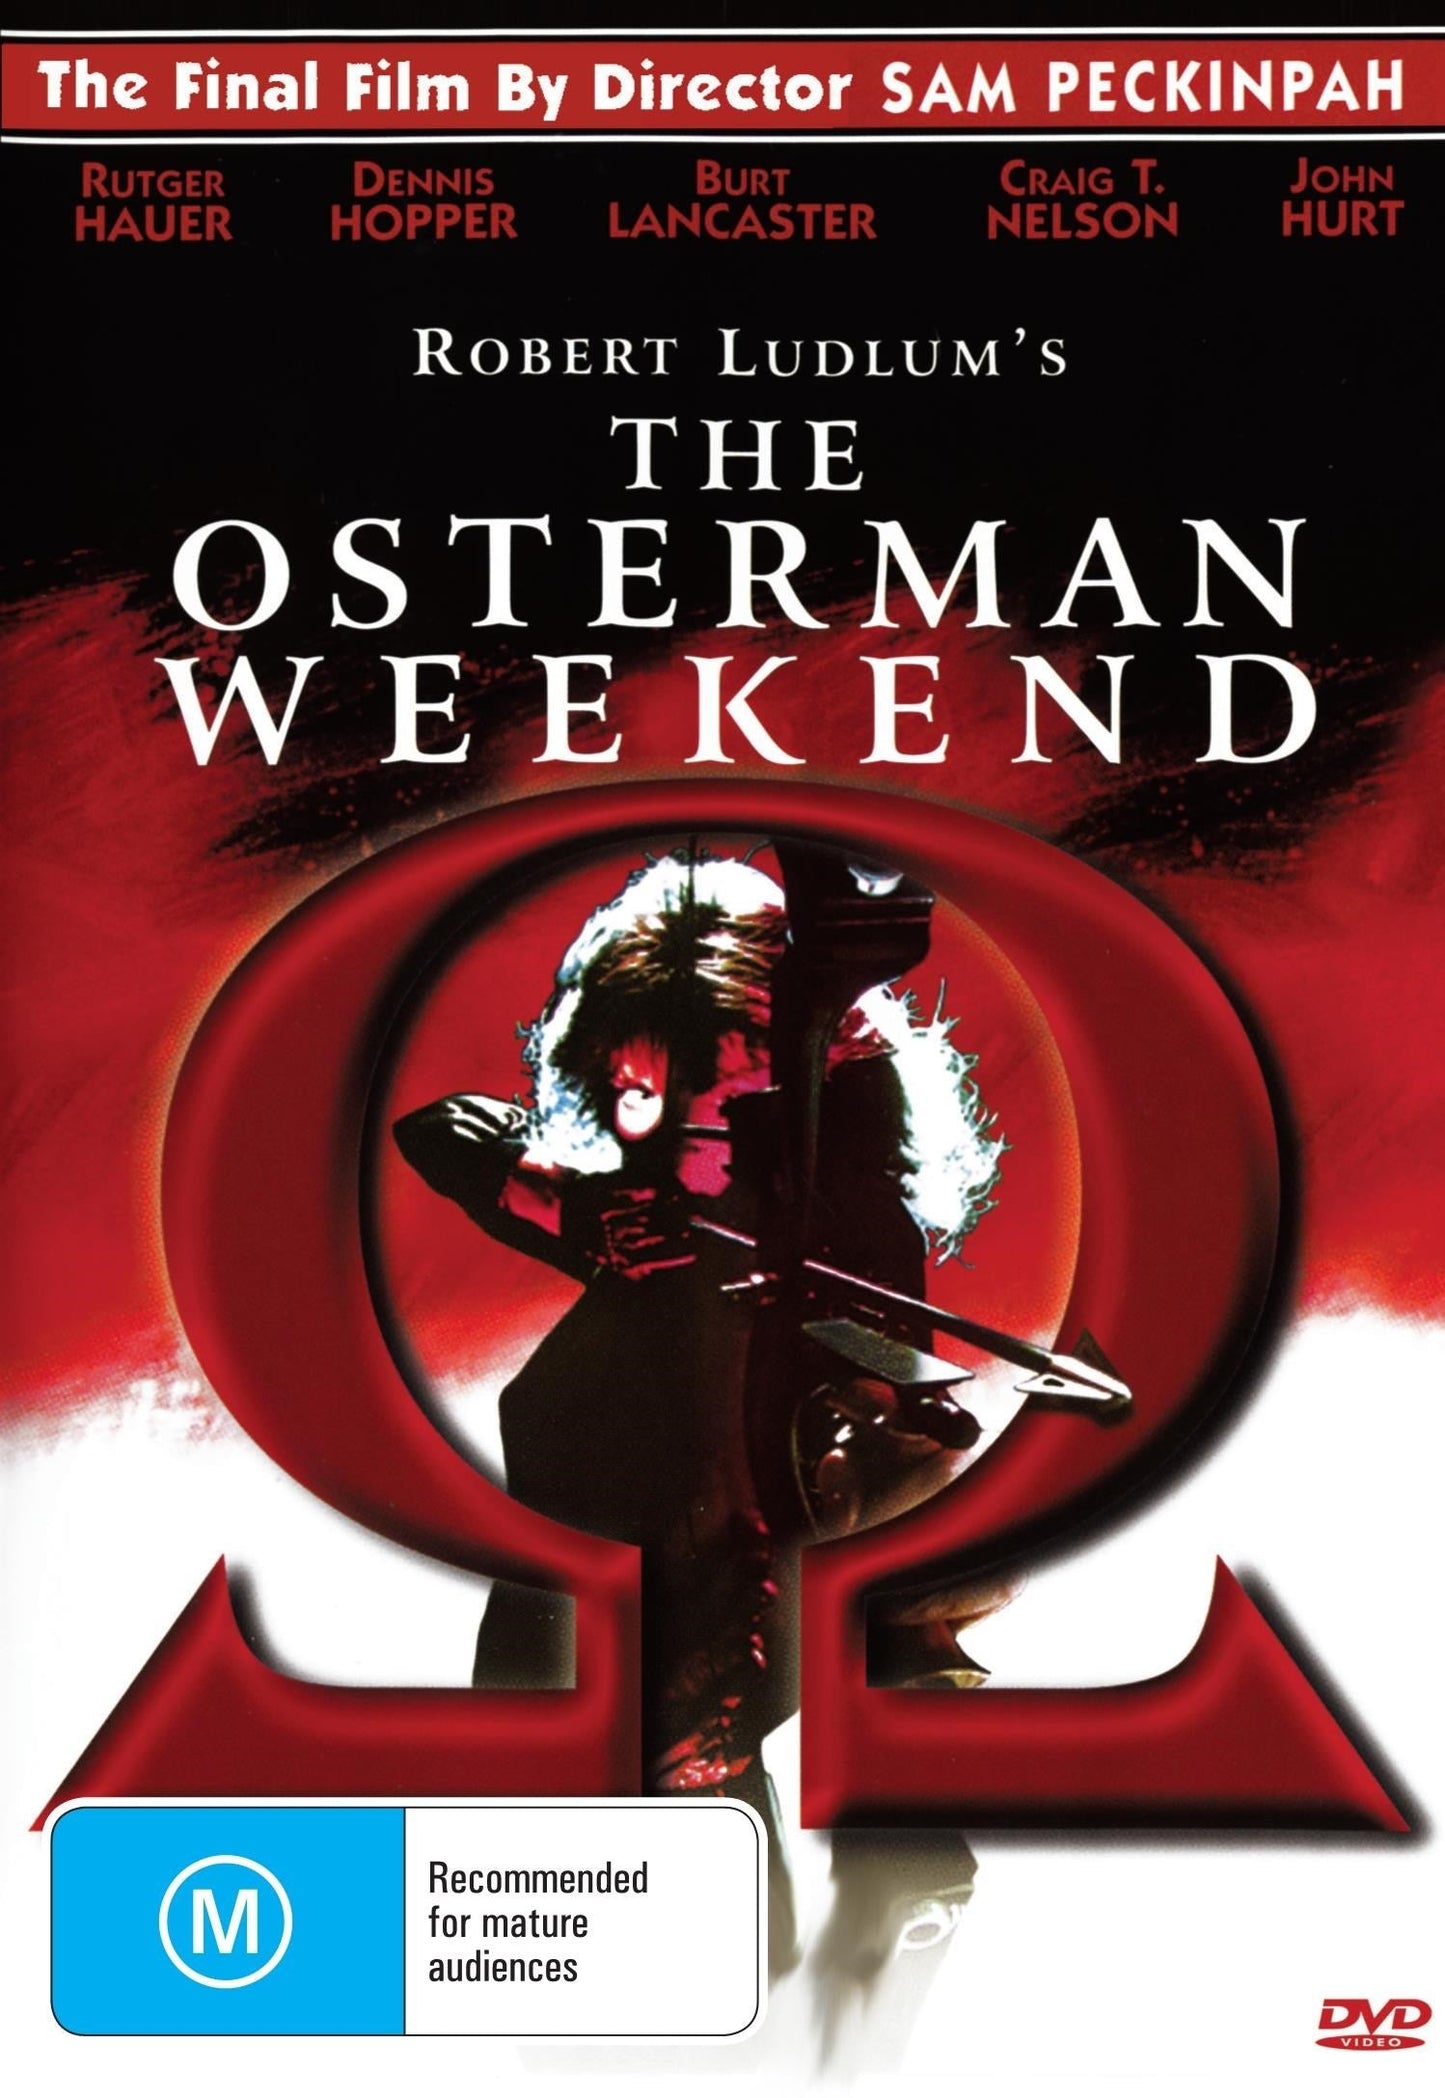 The Osterman Weekend rareandcollectibledvds